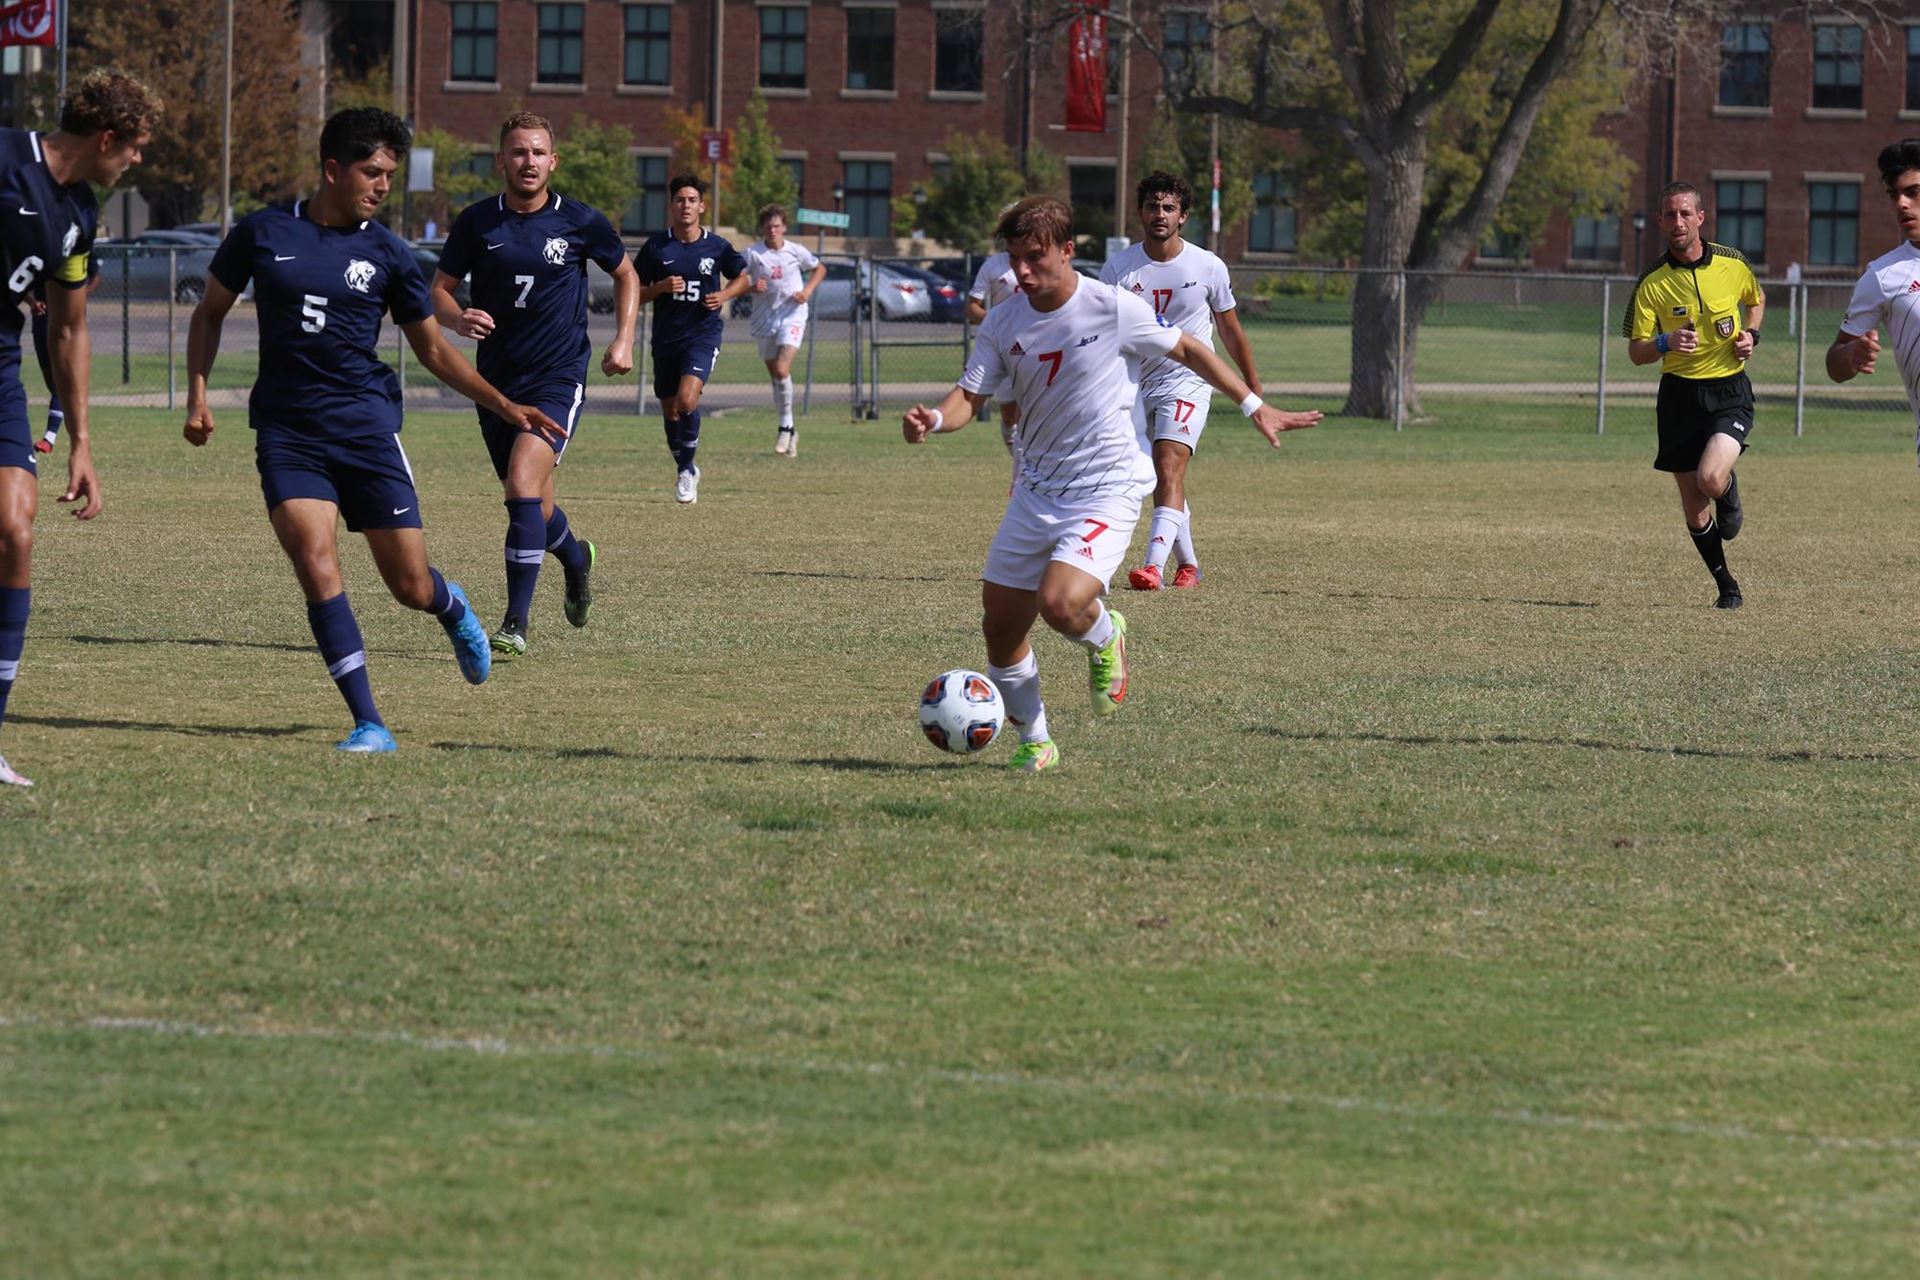 Men’s soccer hopes to stay positive after commanding first victory